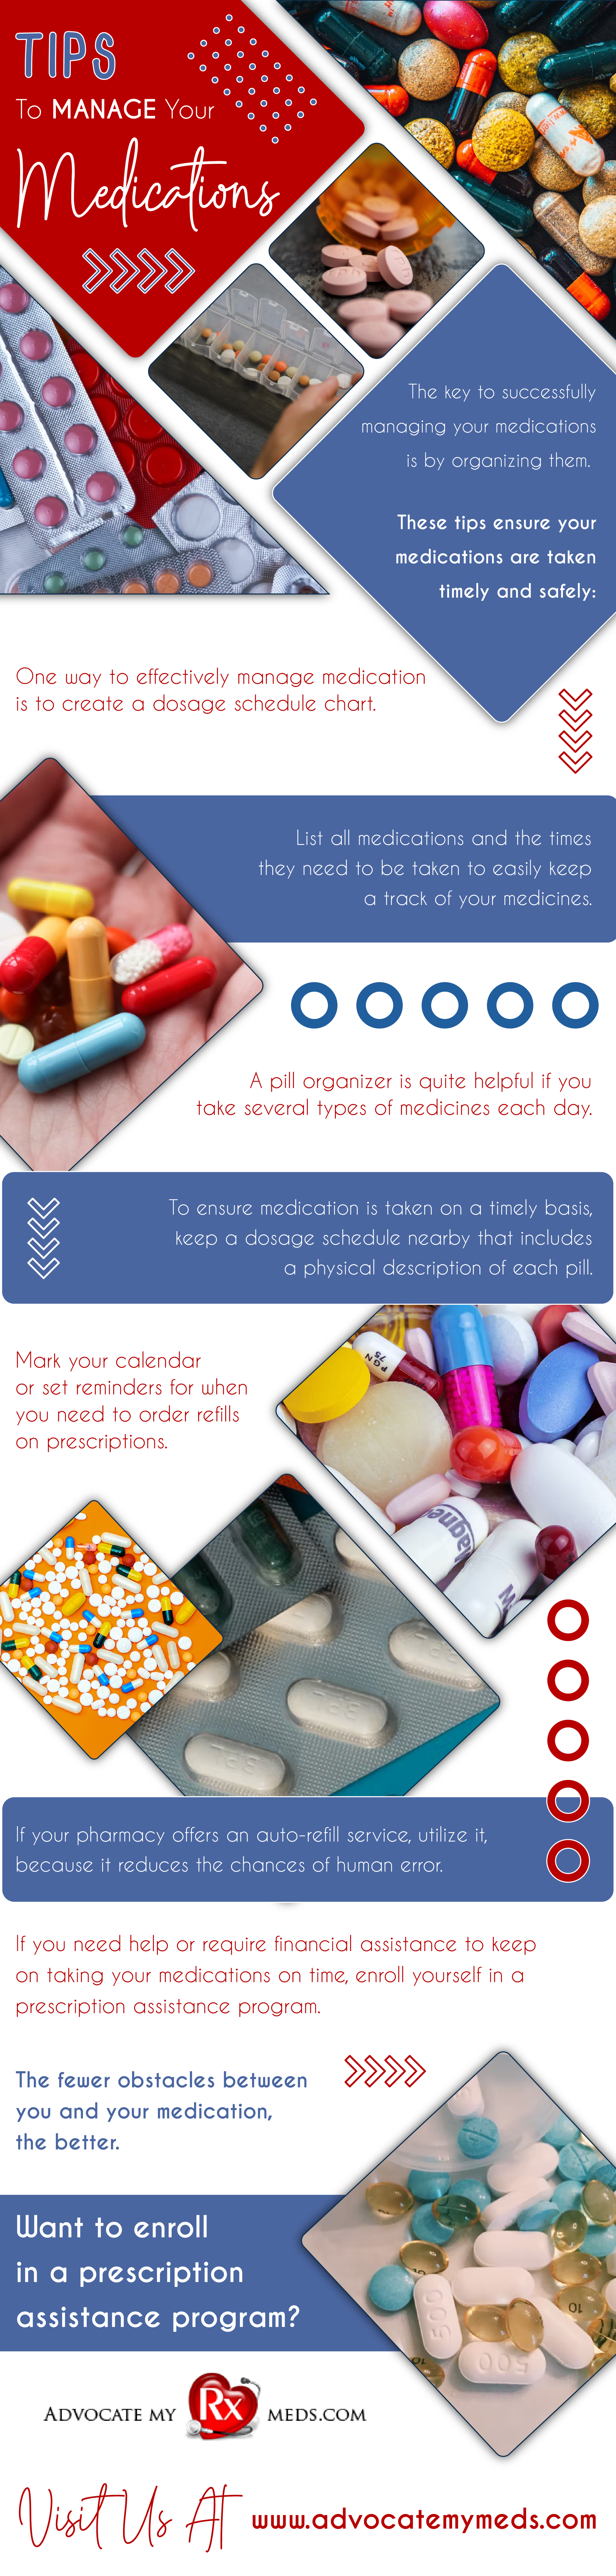 Tips to Manage Your Medications